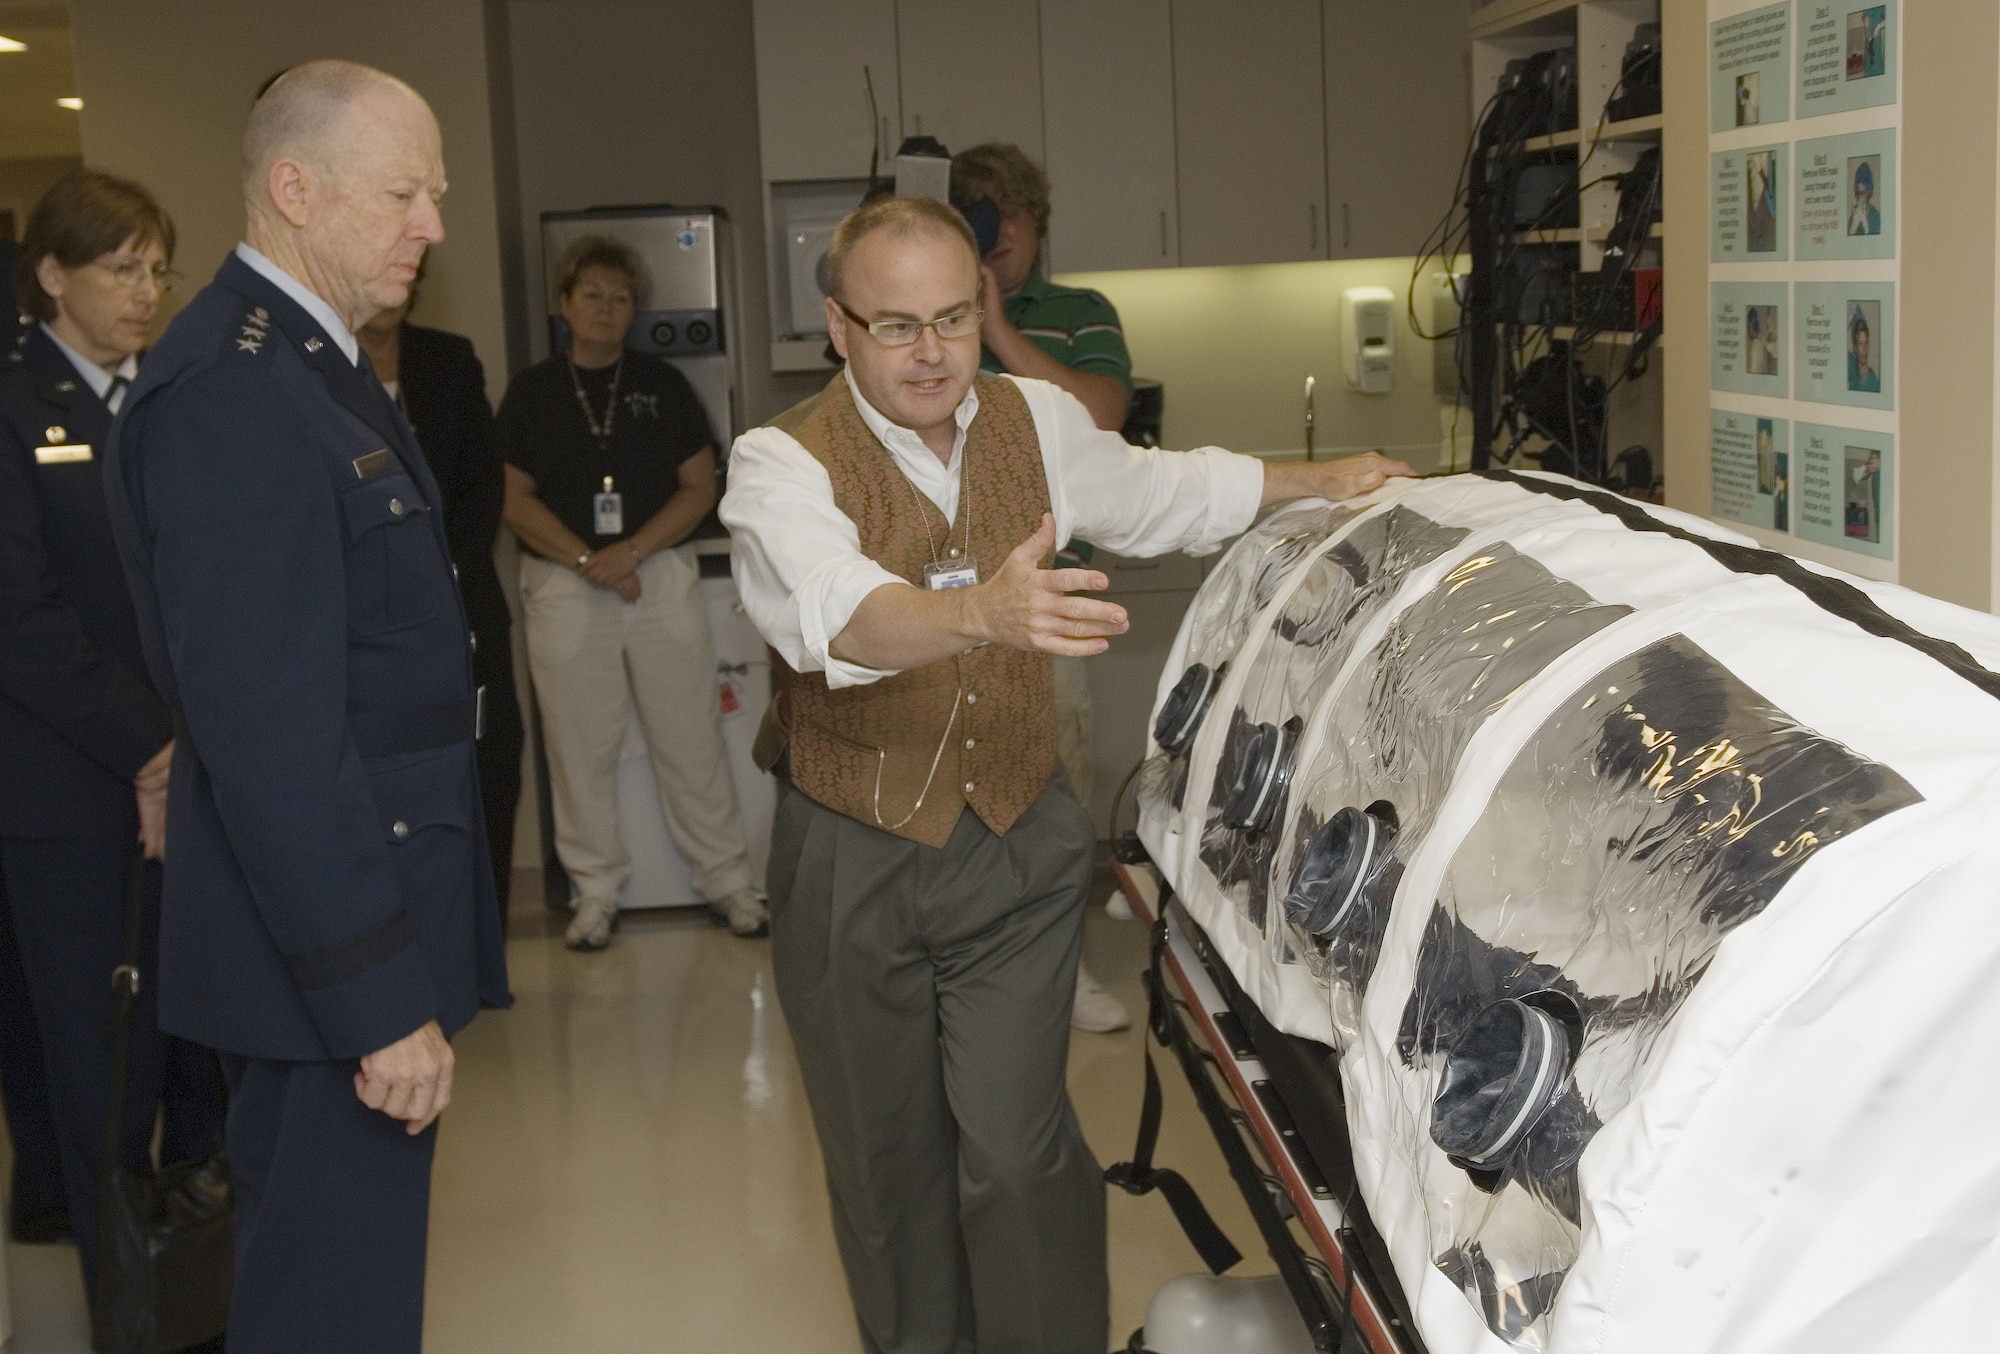 Frank Freihaut points out various features of an isolation pod that is used to transport patients safely through and into an isolation ward to Lt. Gen. (Dr.) James G. Roudebush during a tour of The Nebraska Medical Center’s Biocontainment Unit on the University of Nebraska Medical Center campus Aug. 13 in Omaha Neb. General Roudebush is a Nebraska native and is the Air Force surgeon general. Mr. Freihaut is a respiratory therapist. (U.S. Air Force photo/Lance Cheung)